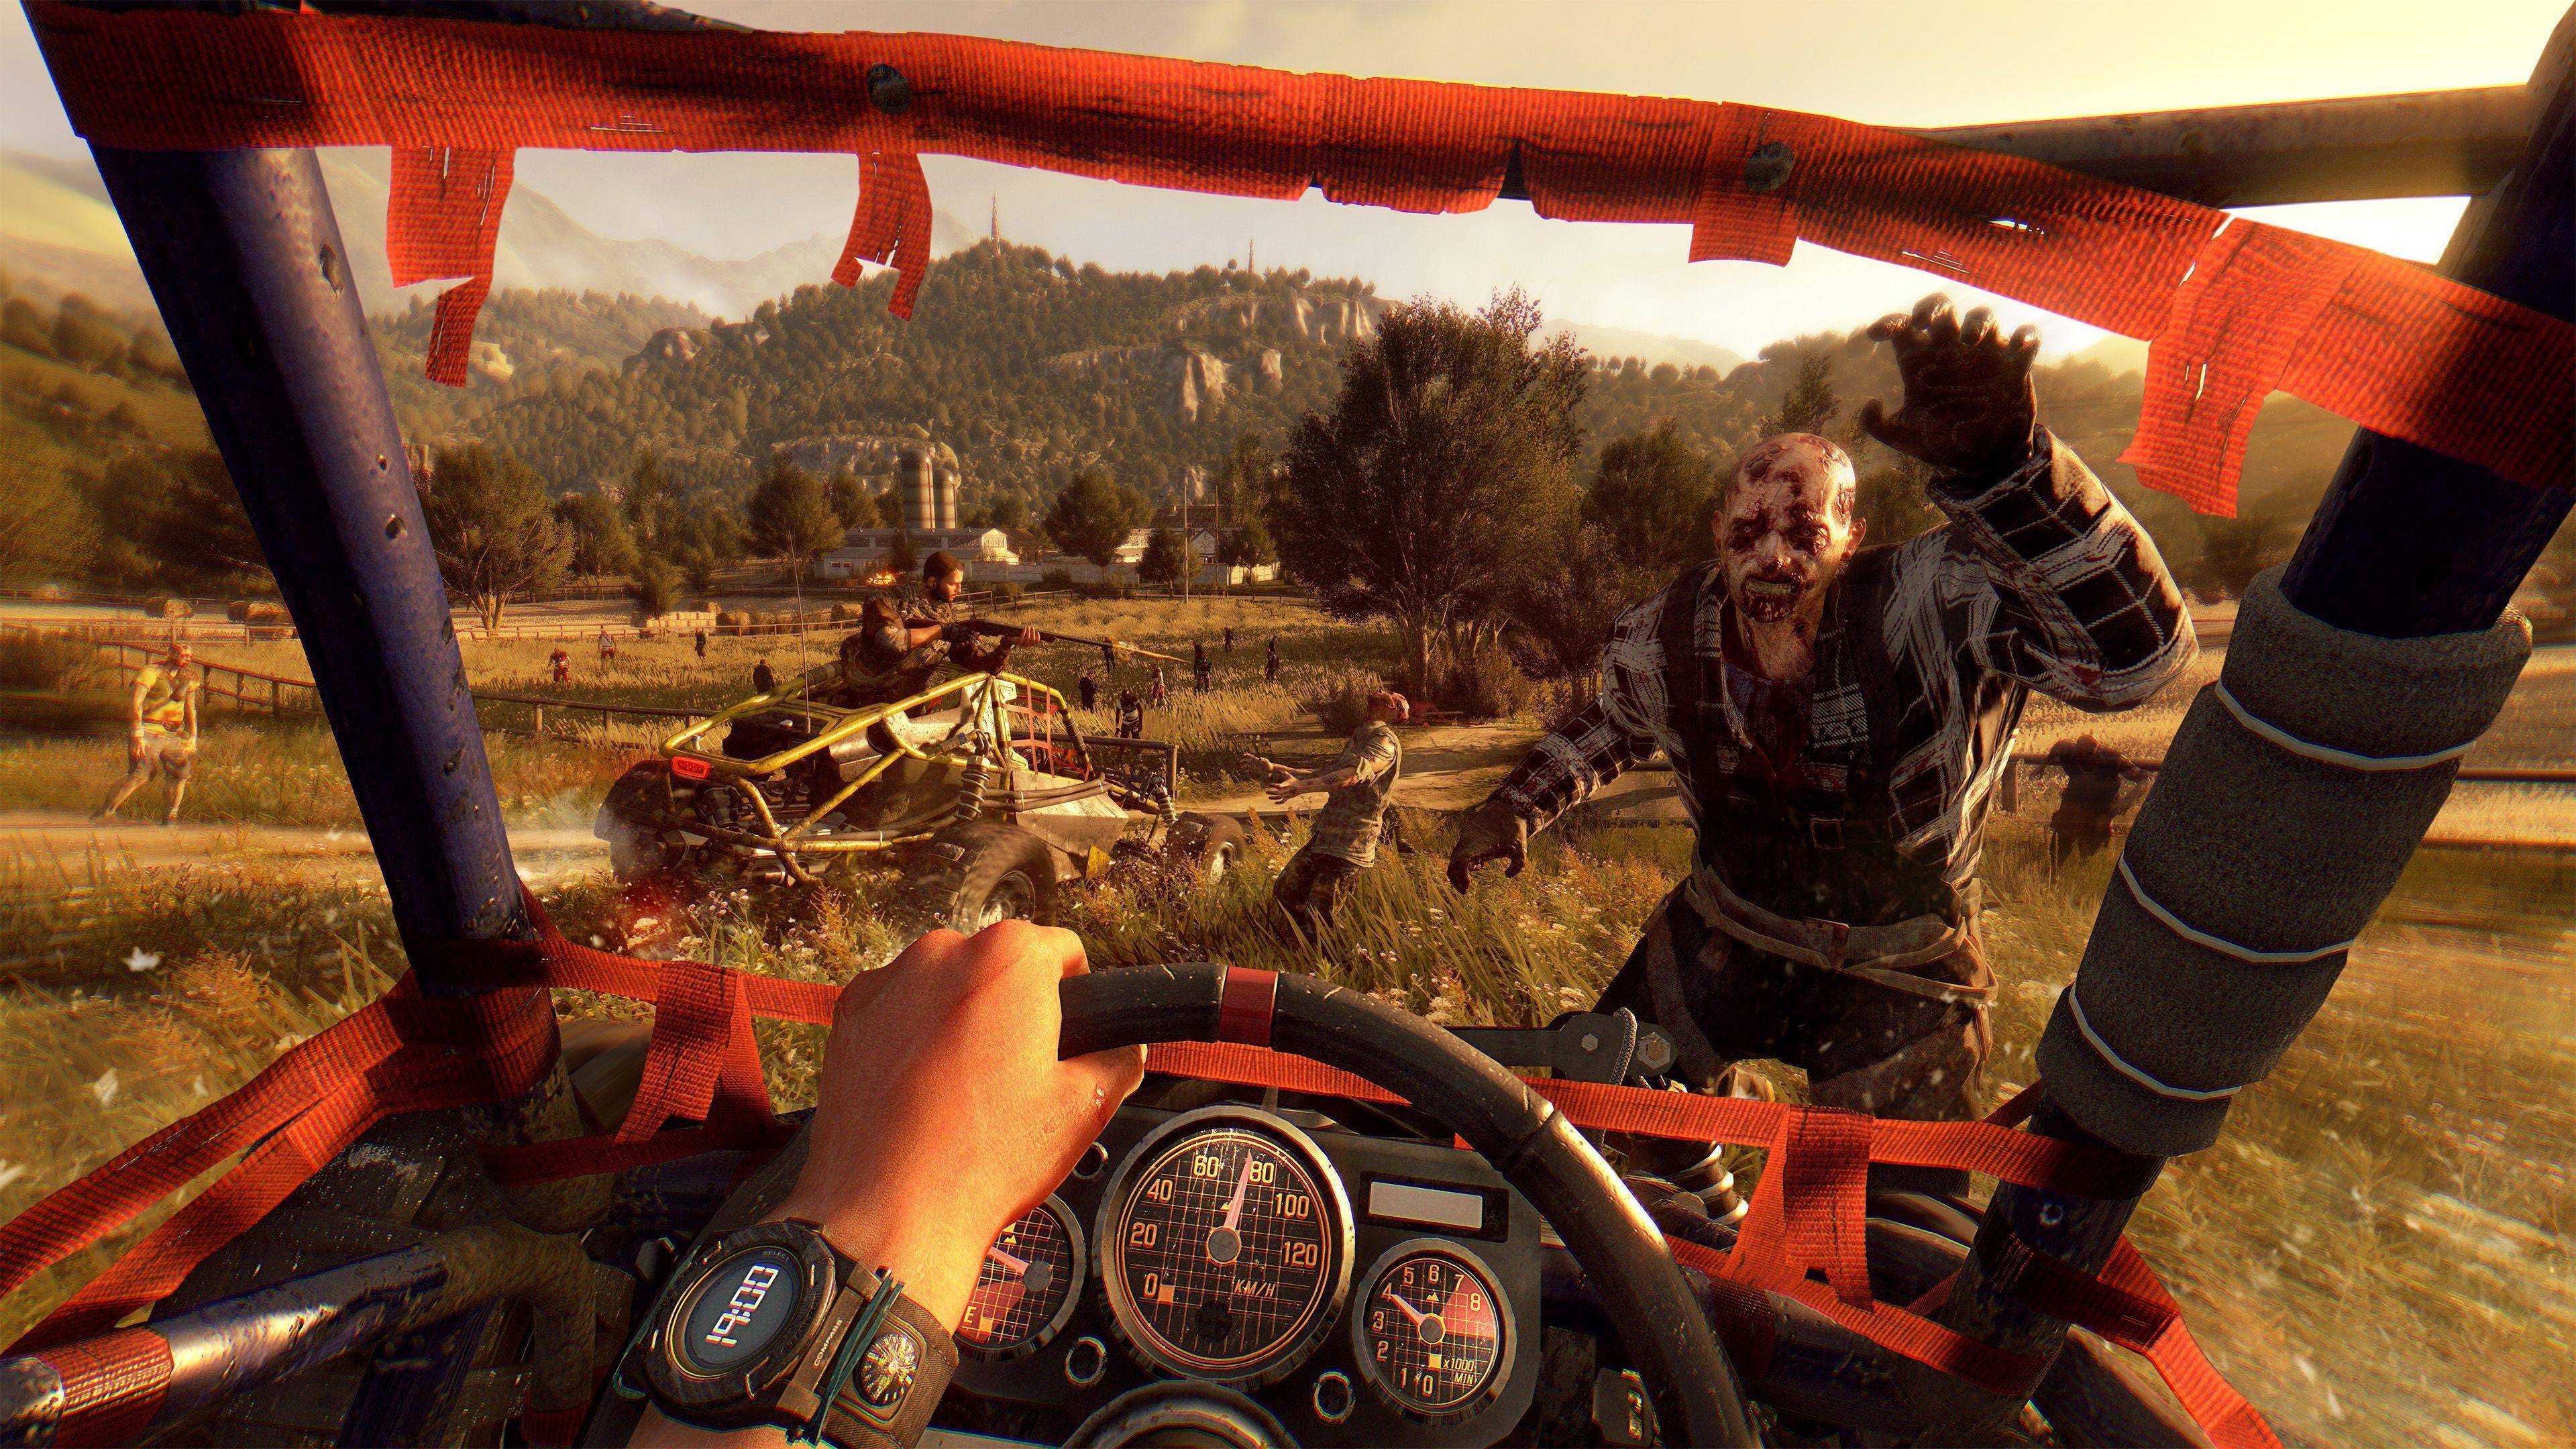 dying light enhanced edition ps4